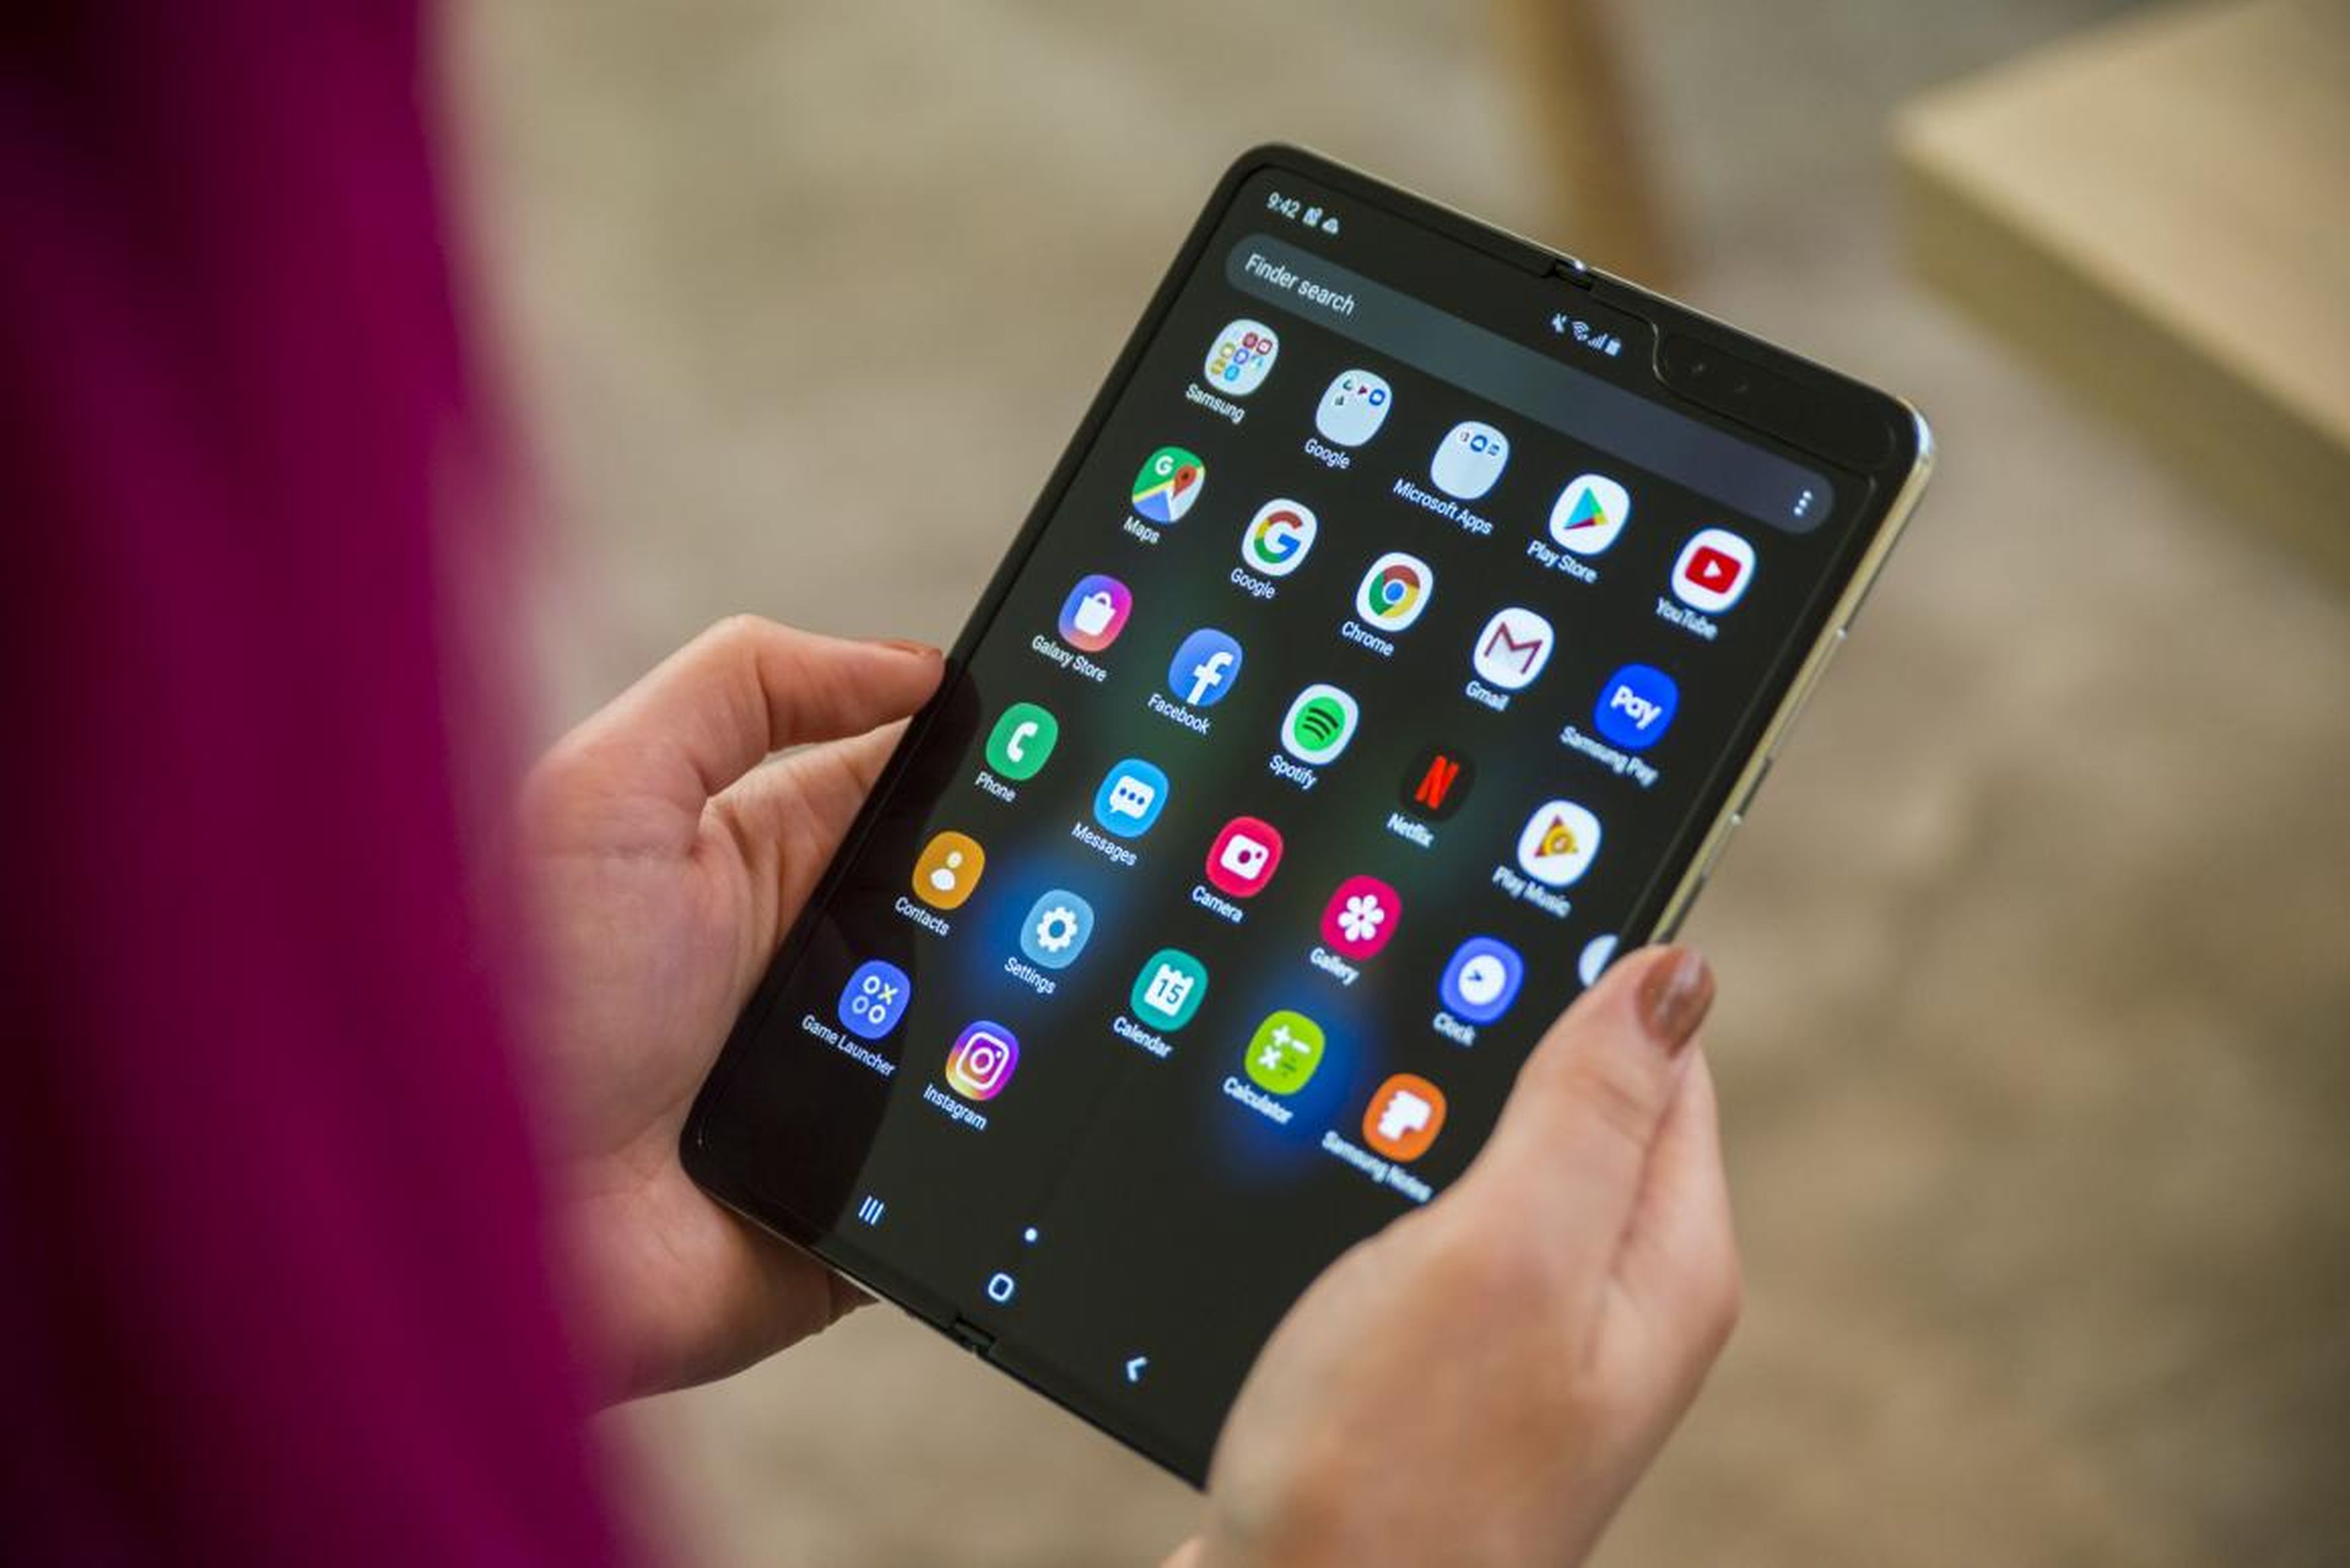 5. In mid-April, just ahead of the planned April 26 launch of the Galaxy Fold, Samsung offered an opportunity for the media to use it. The early impressions were largely positive.